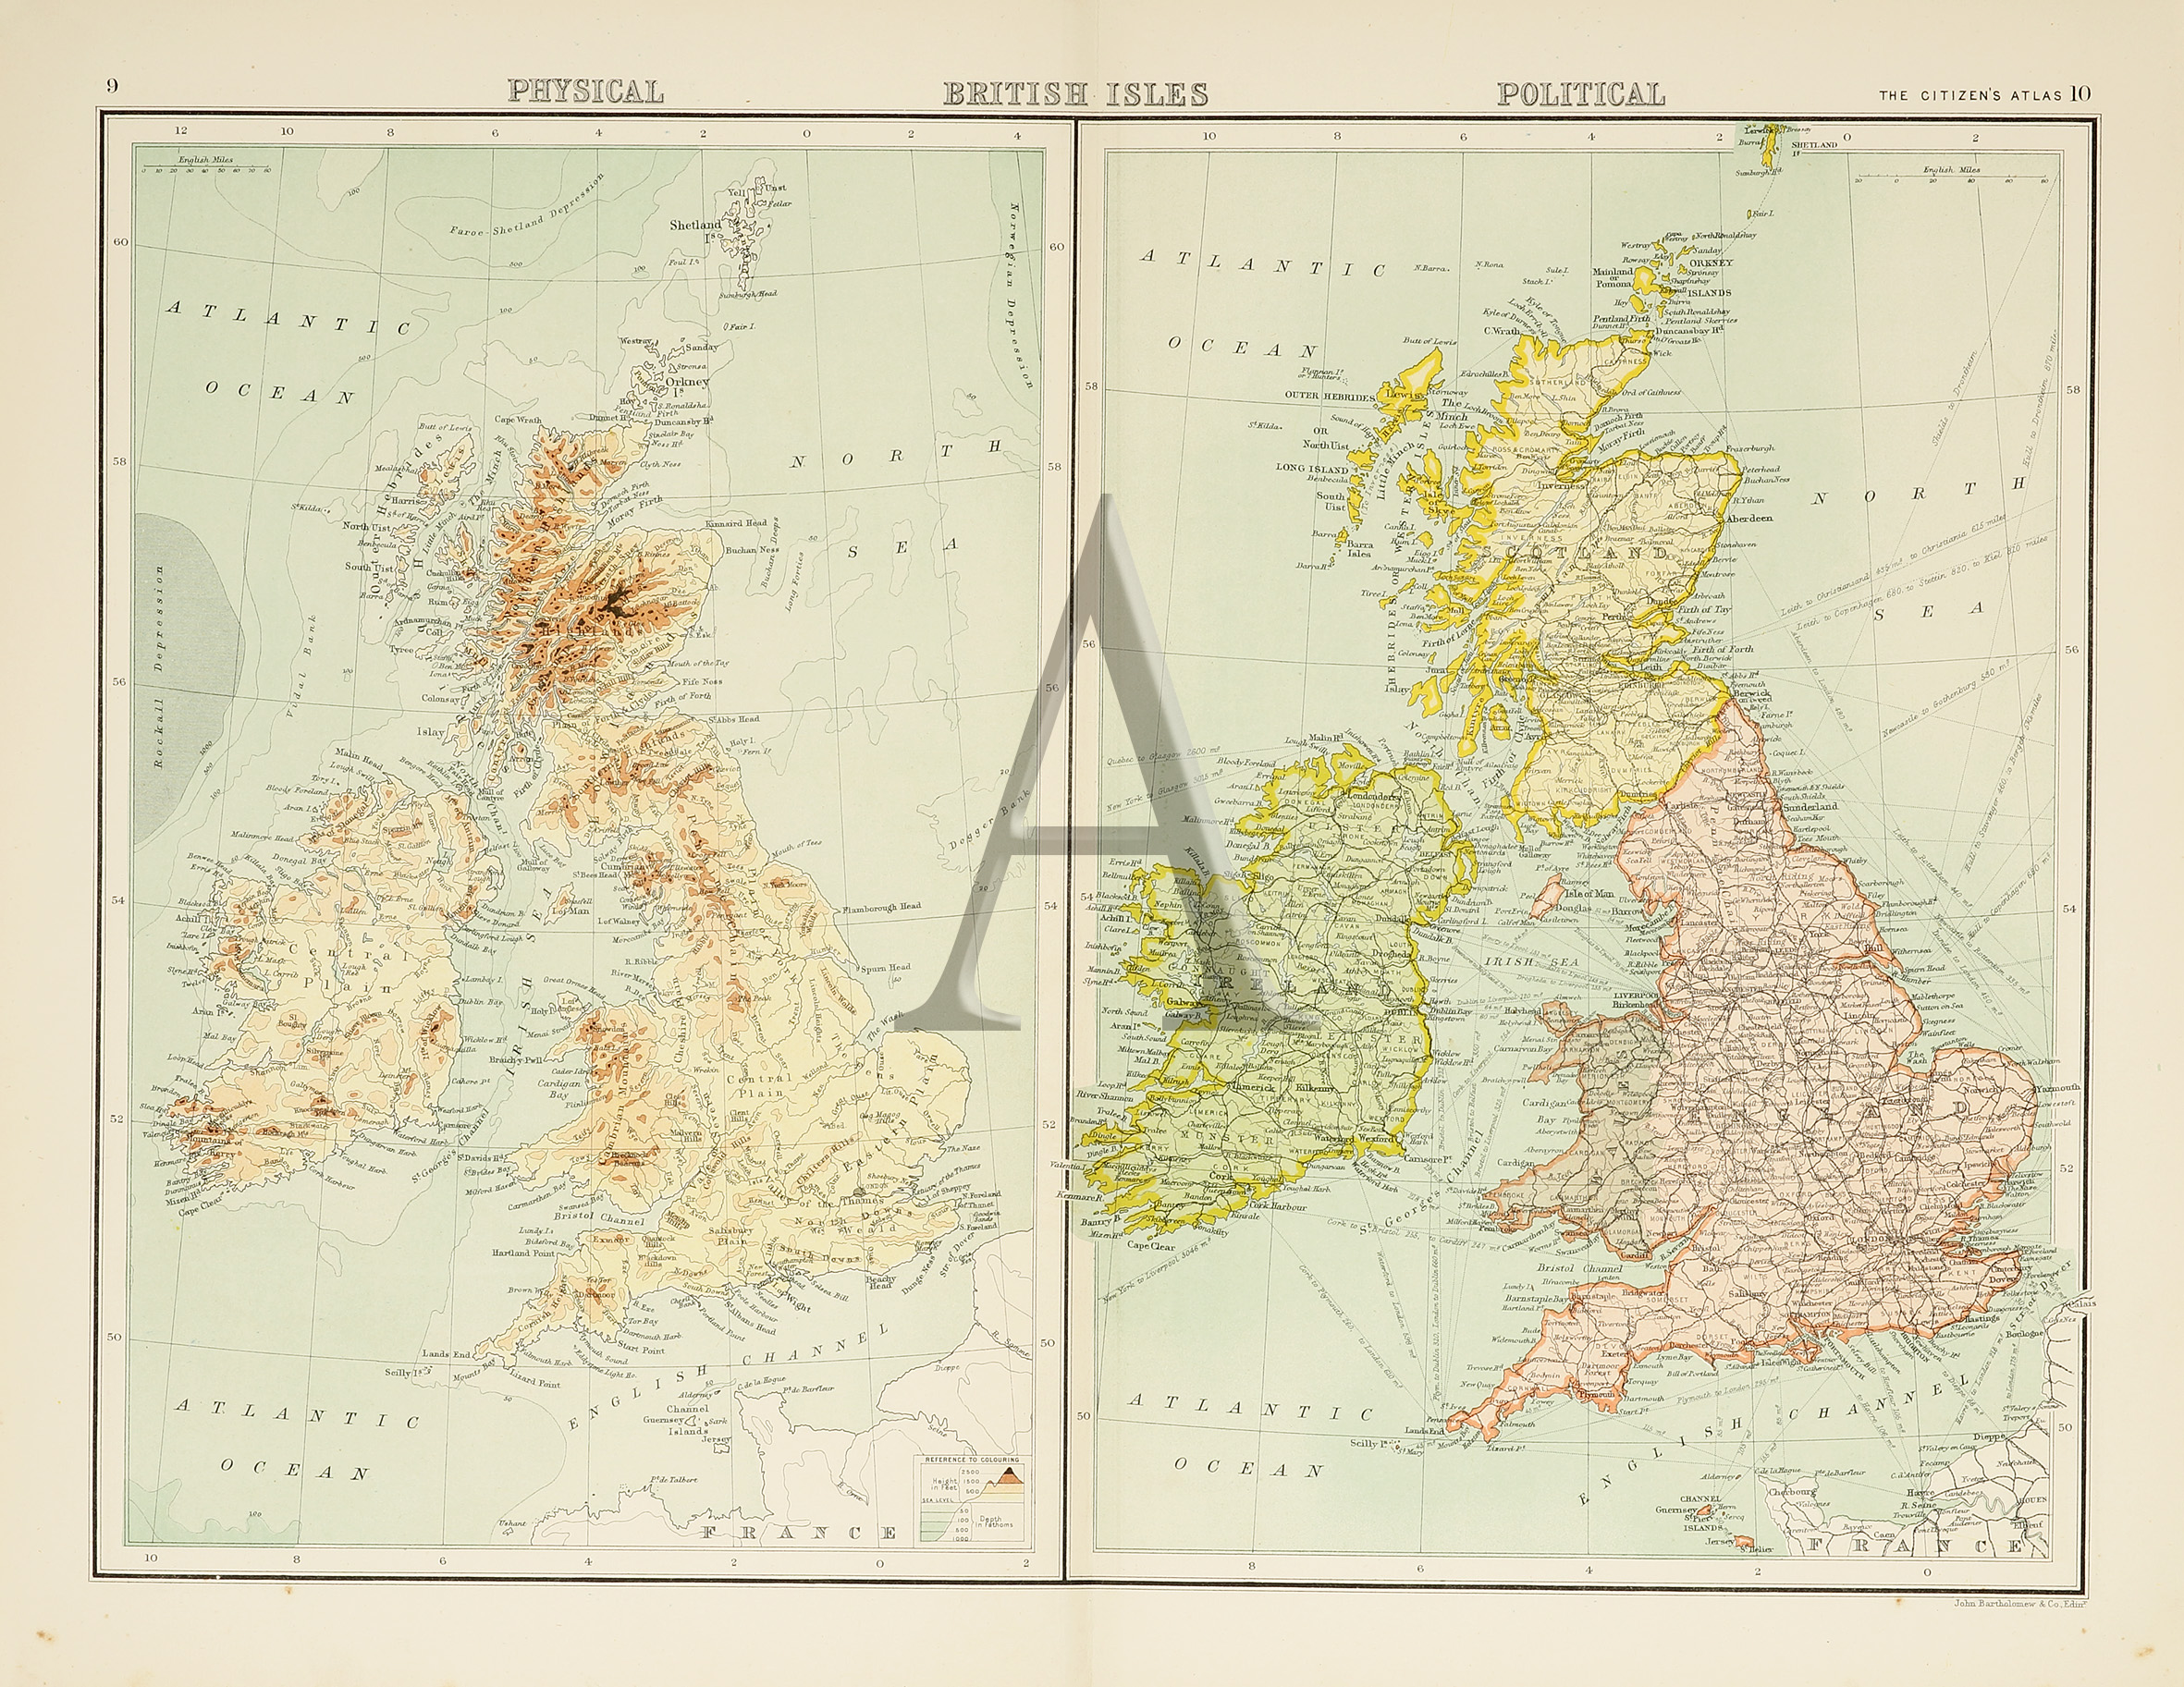 Physical British Isles Political - Antique Print from 1902